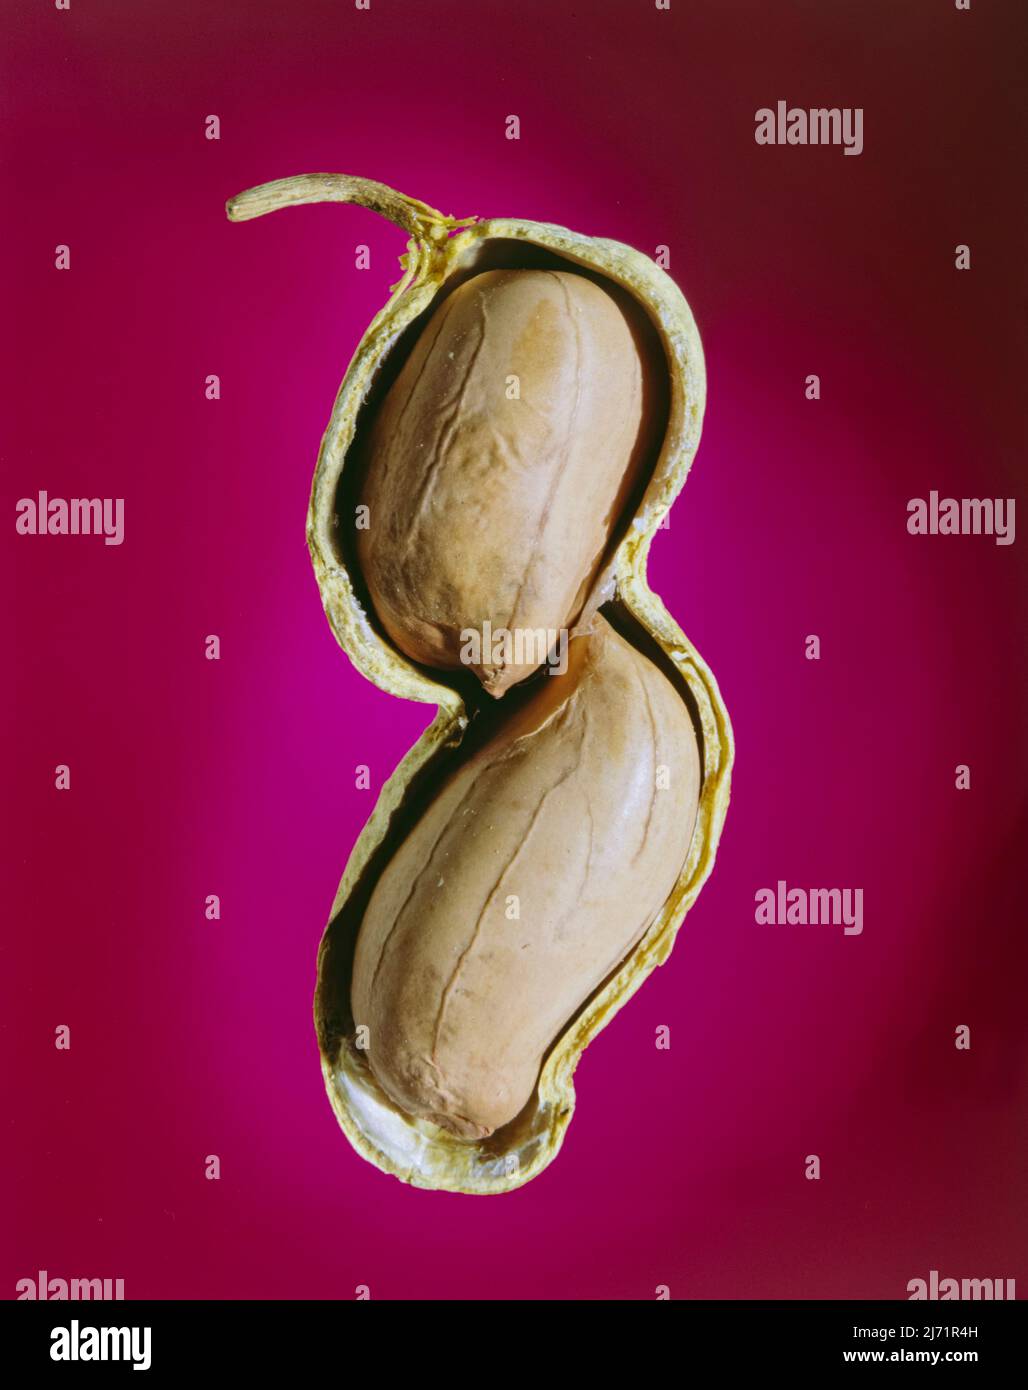 Peanut in shell, pink background. Image from 4x5 inch film transparency. Stock Photo